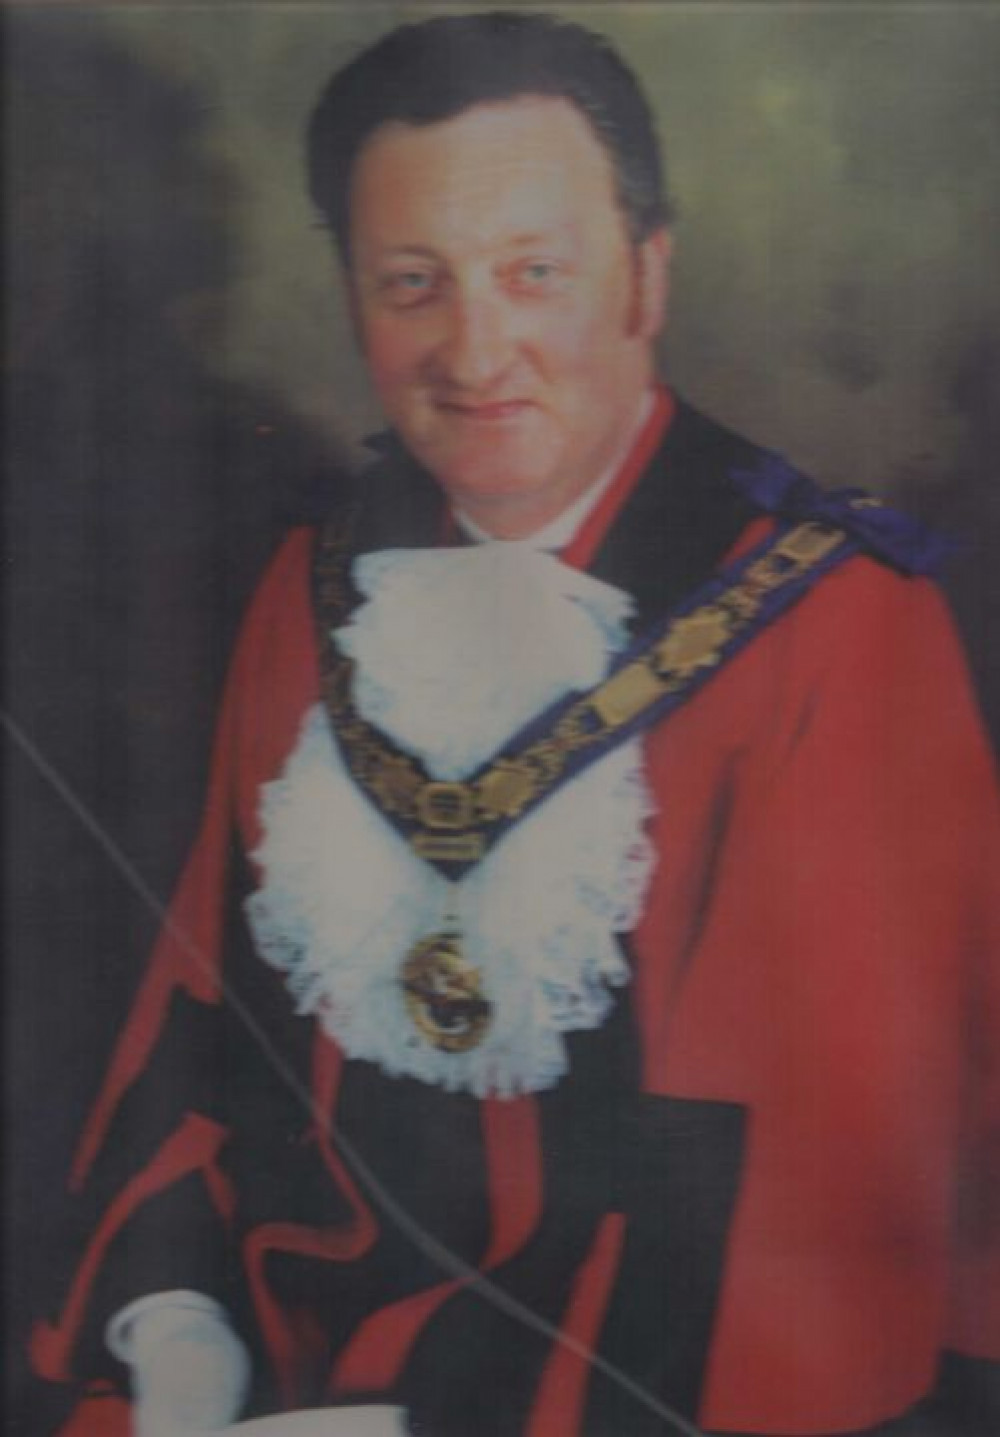 Michael Steer who served two terms as Mayor of Axminster